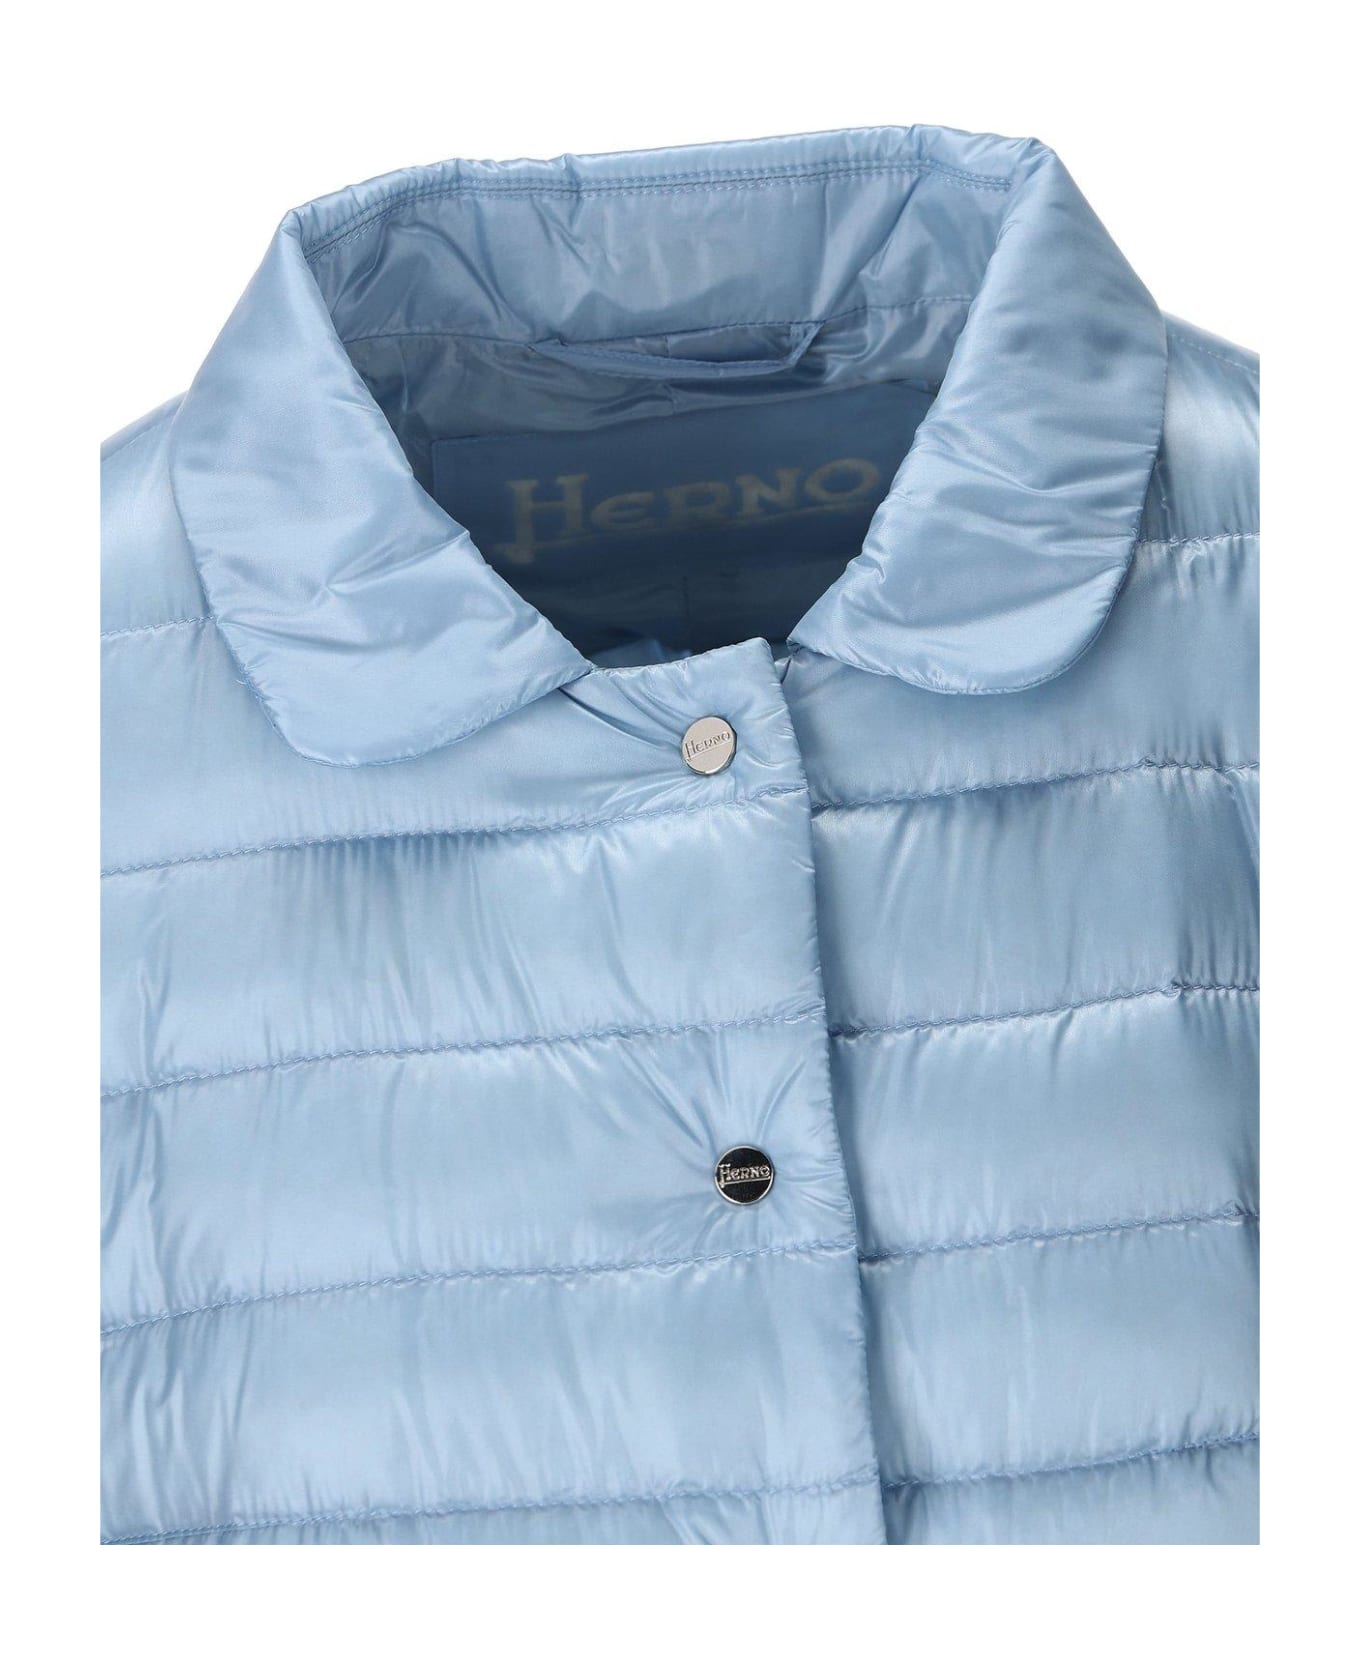 Herno Button-up Down Jacket - BLUE